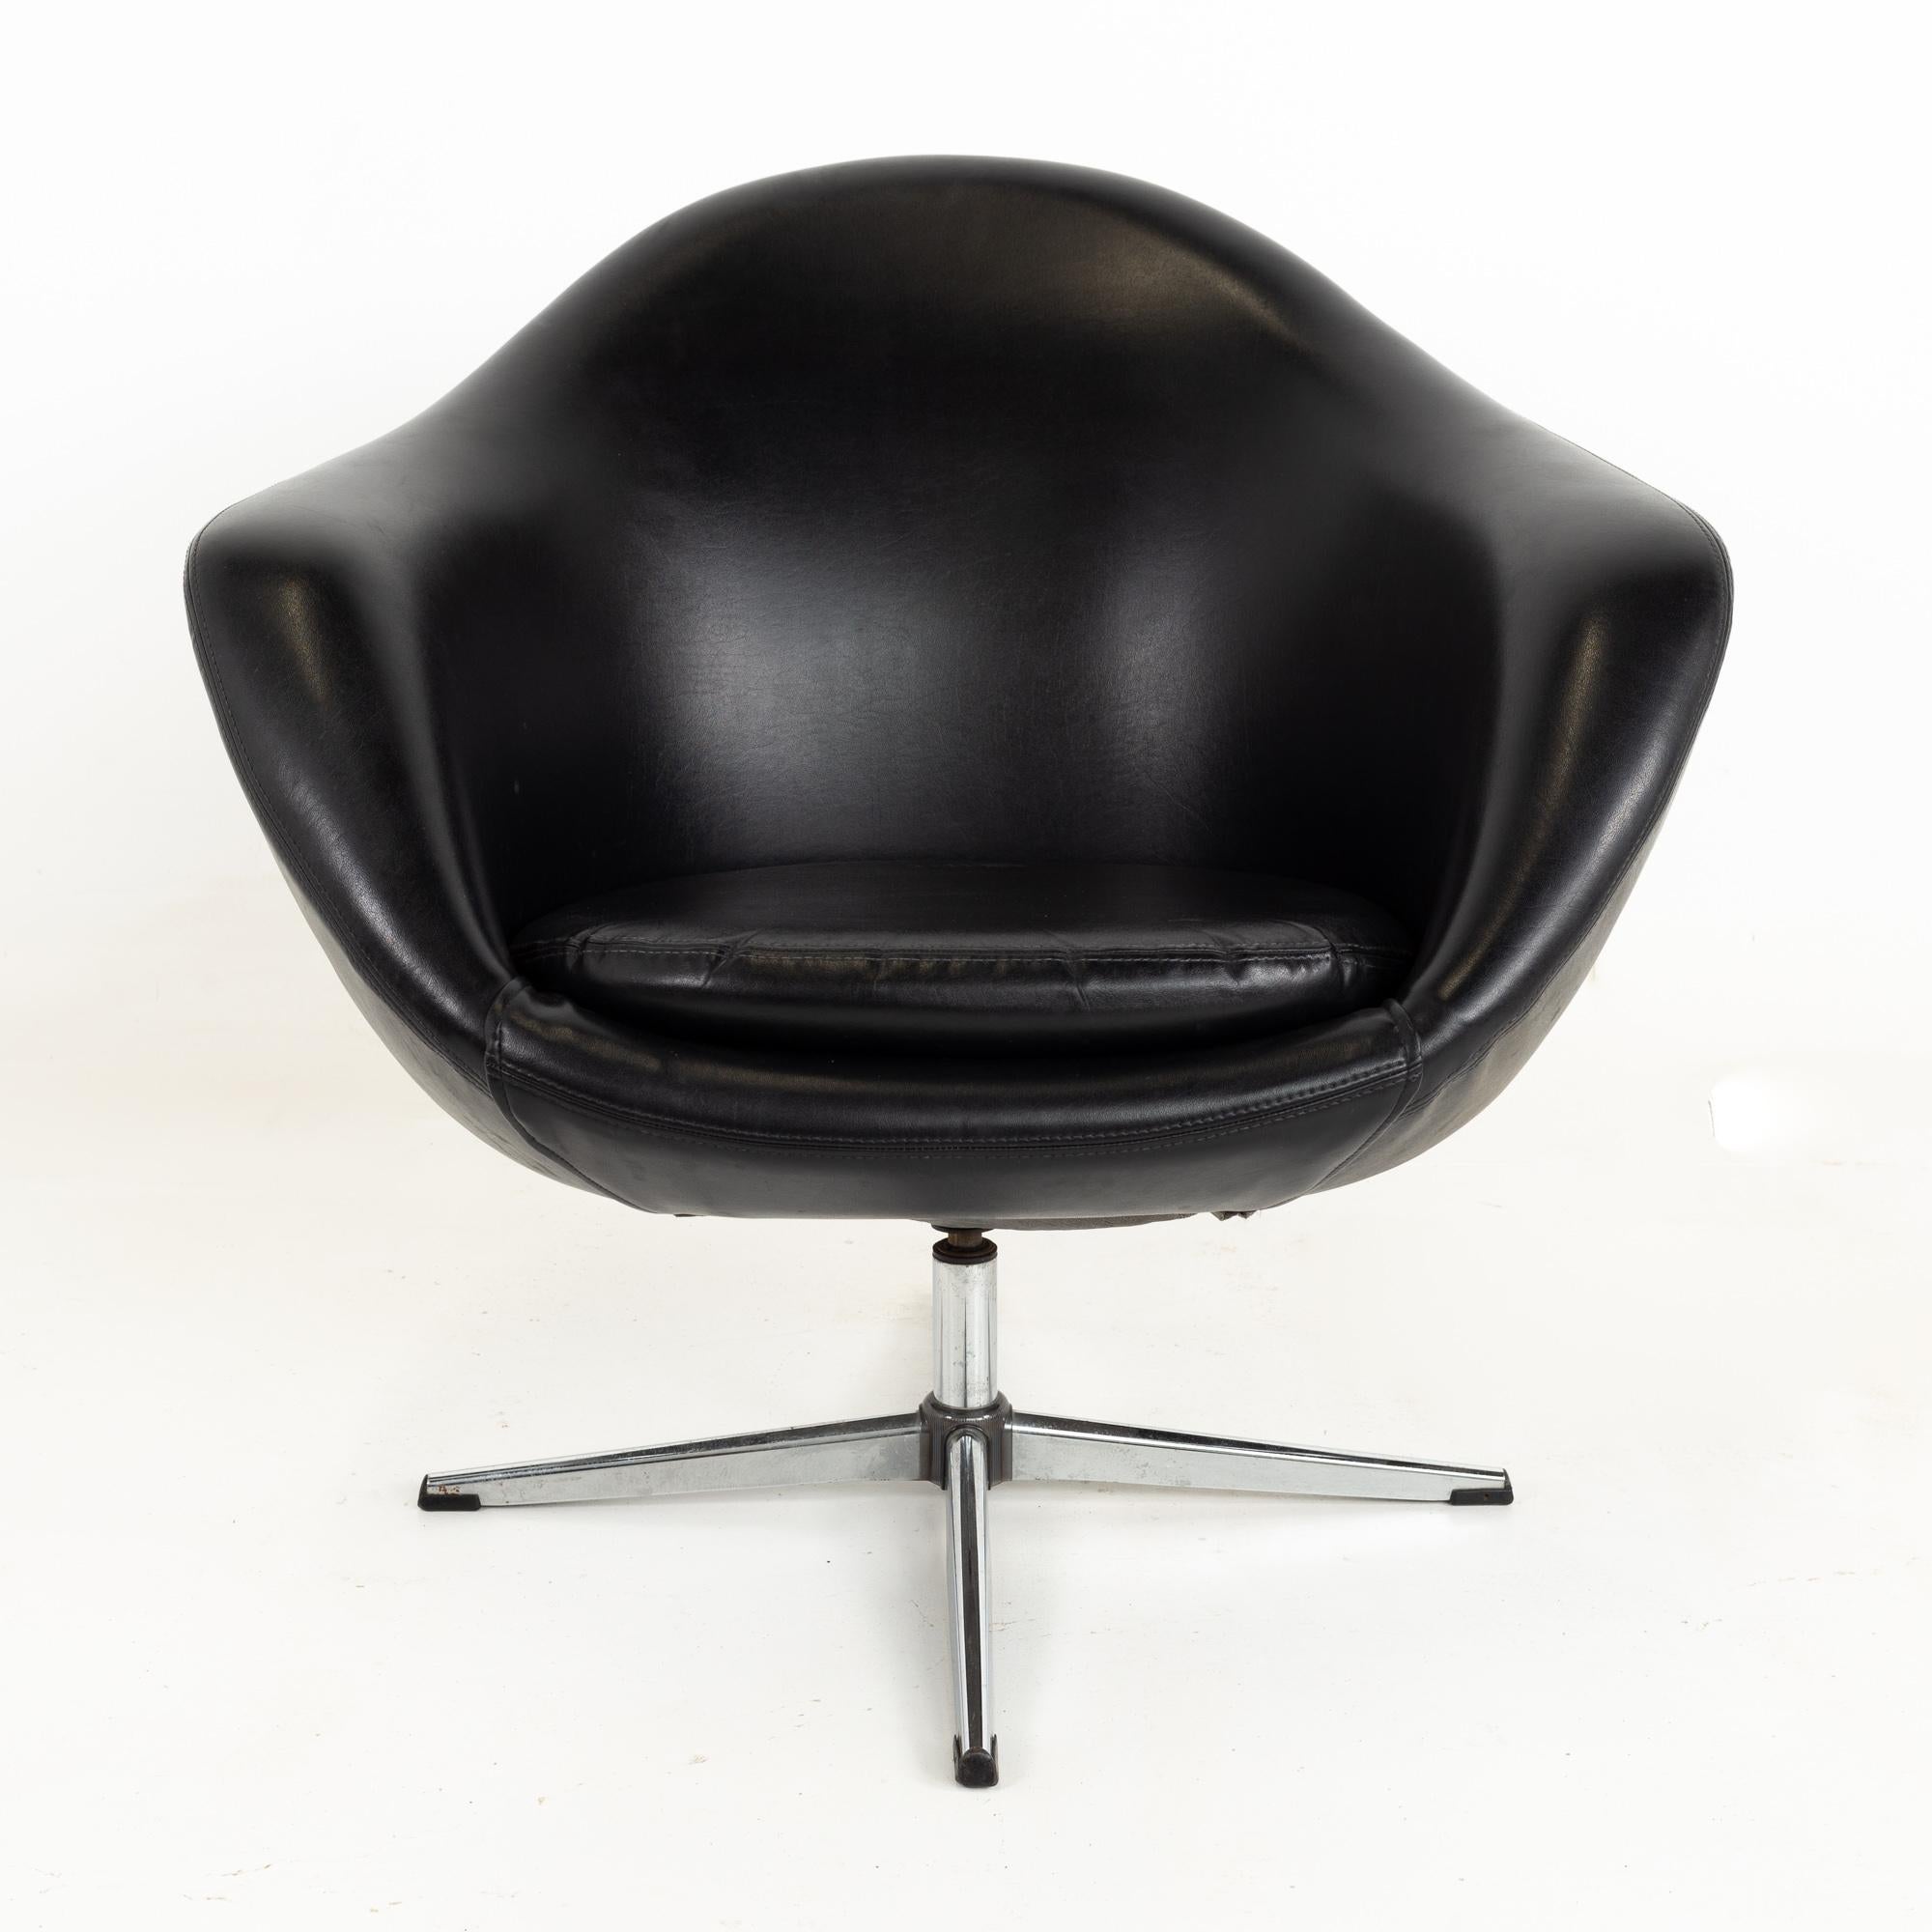 Overman pod Mid Century black swivel lounge chair
This chair is 32.75 wide x 29 deep x 31 inches high, with a seat height of 16.5 and arm height of 23.25 inches

This piece is available in what we call restored vintage condition. Upon purchase it is